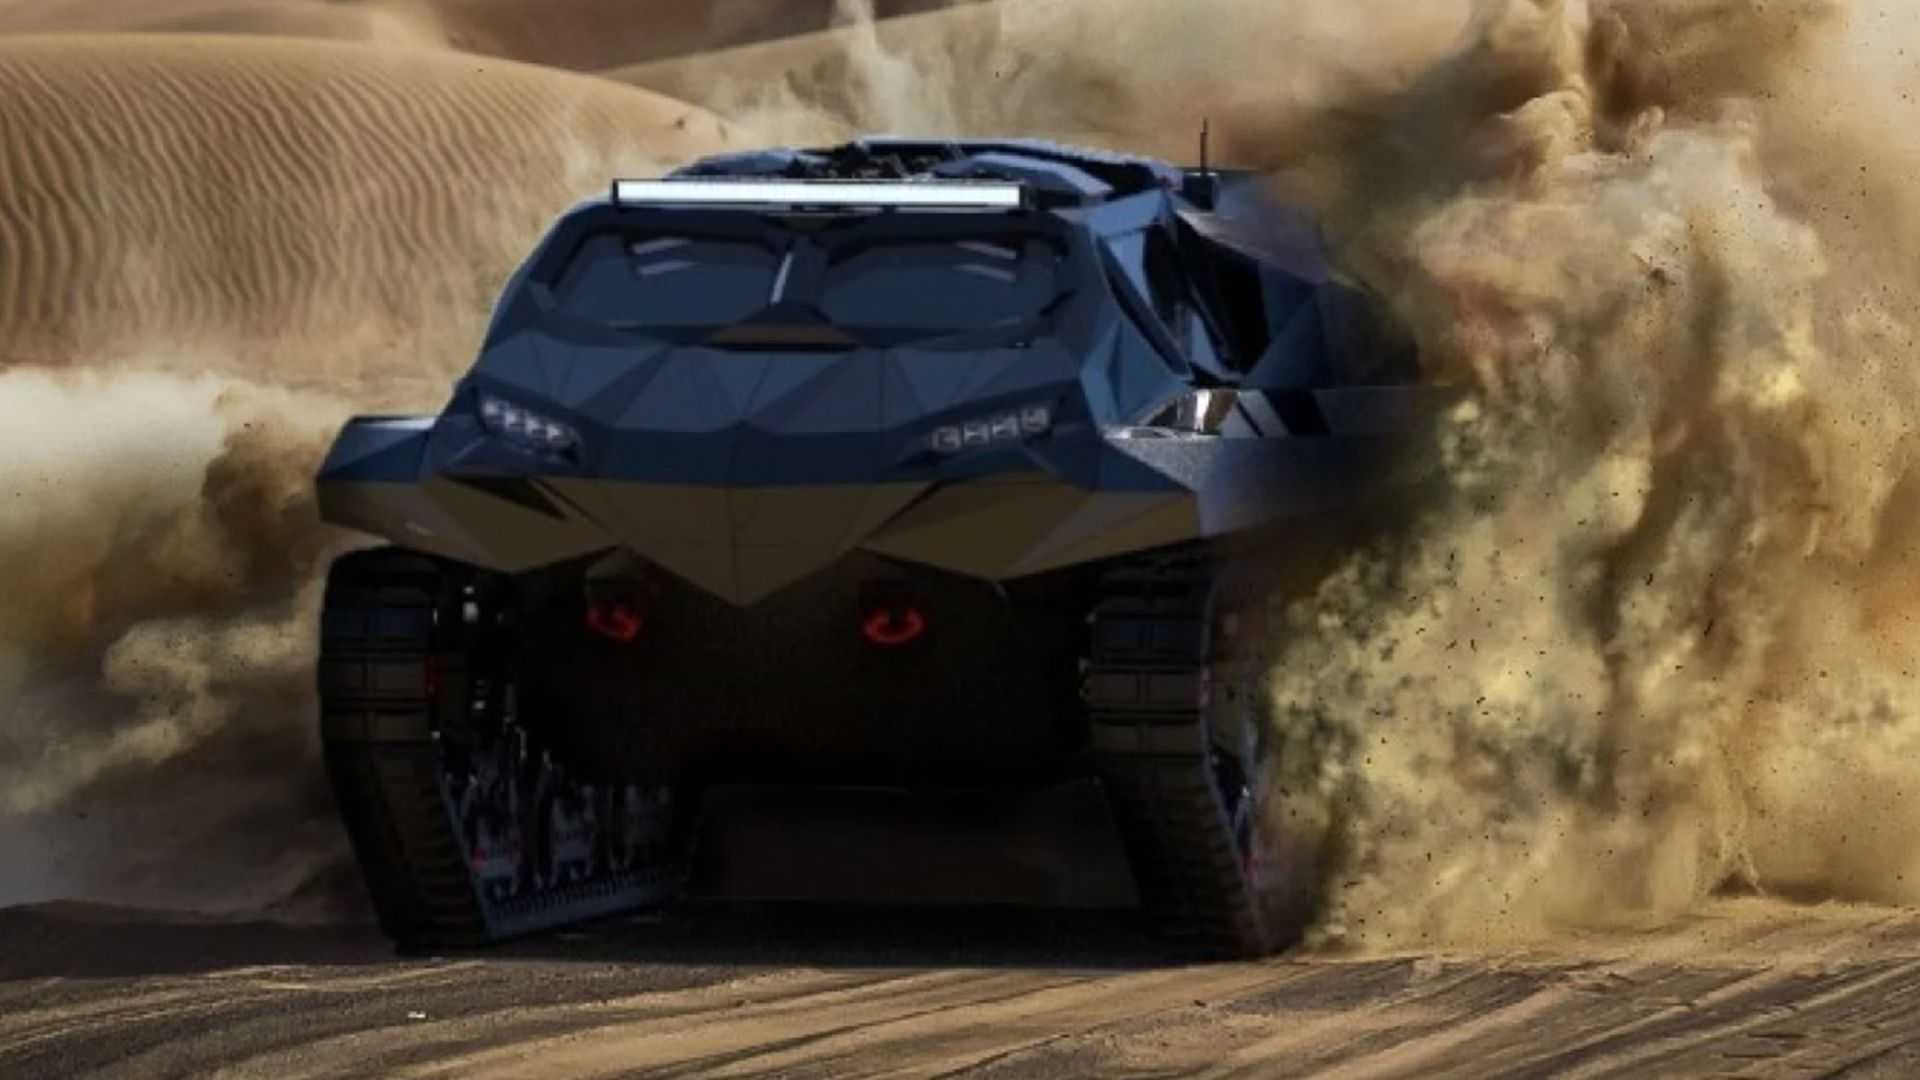 The Storm Is A Fierce Looking Amphibious Tank With A Steering Wheel 1920x1080